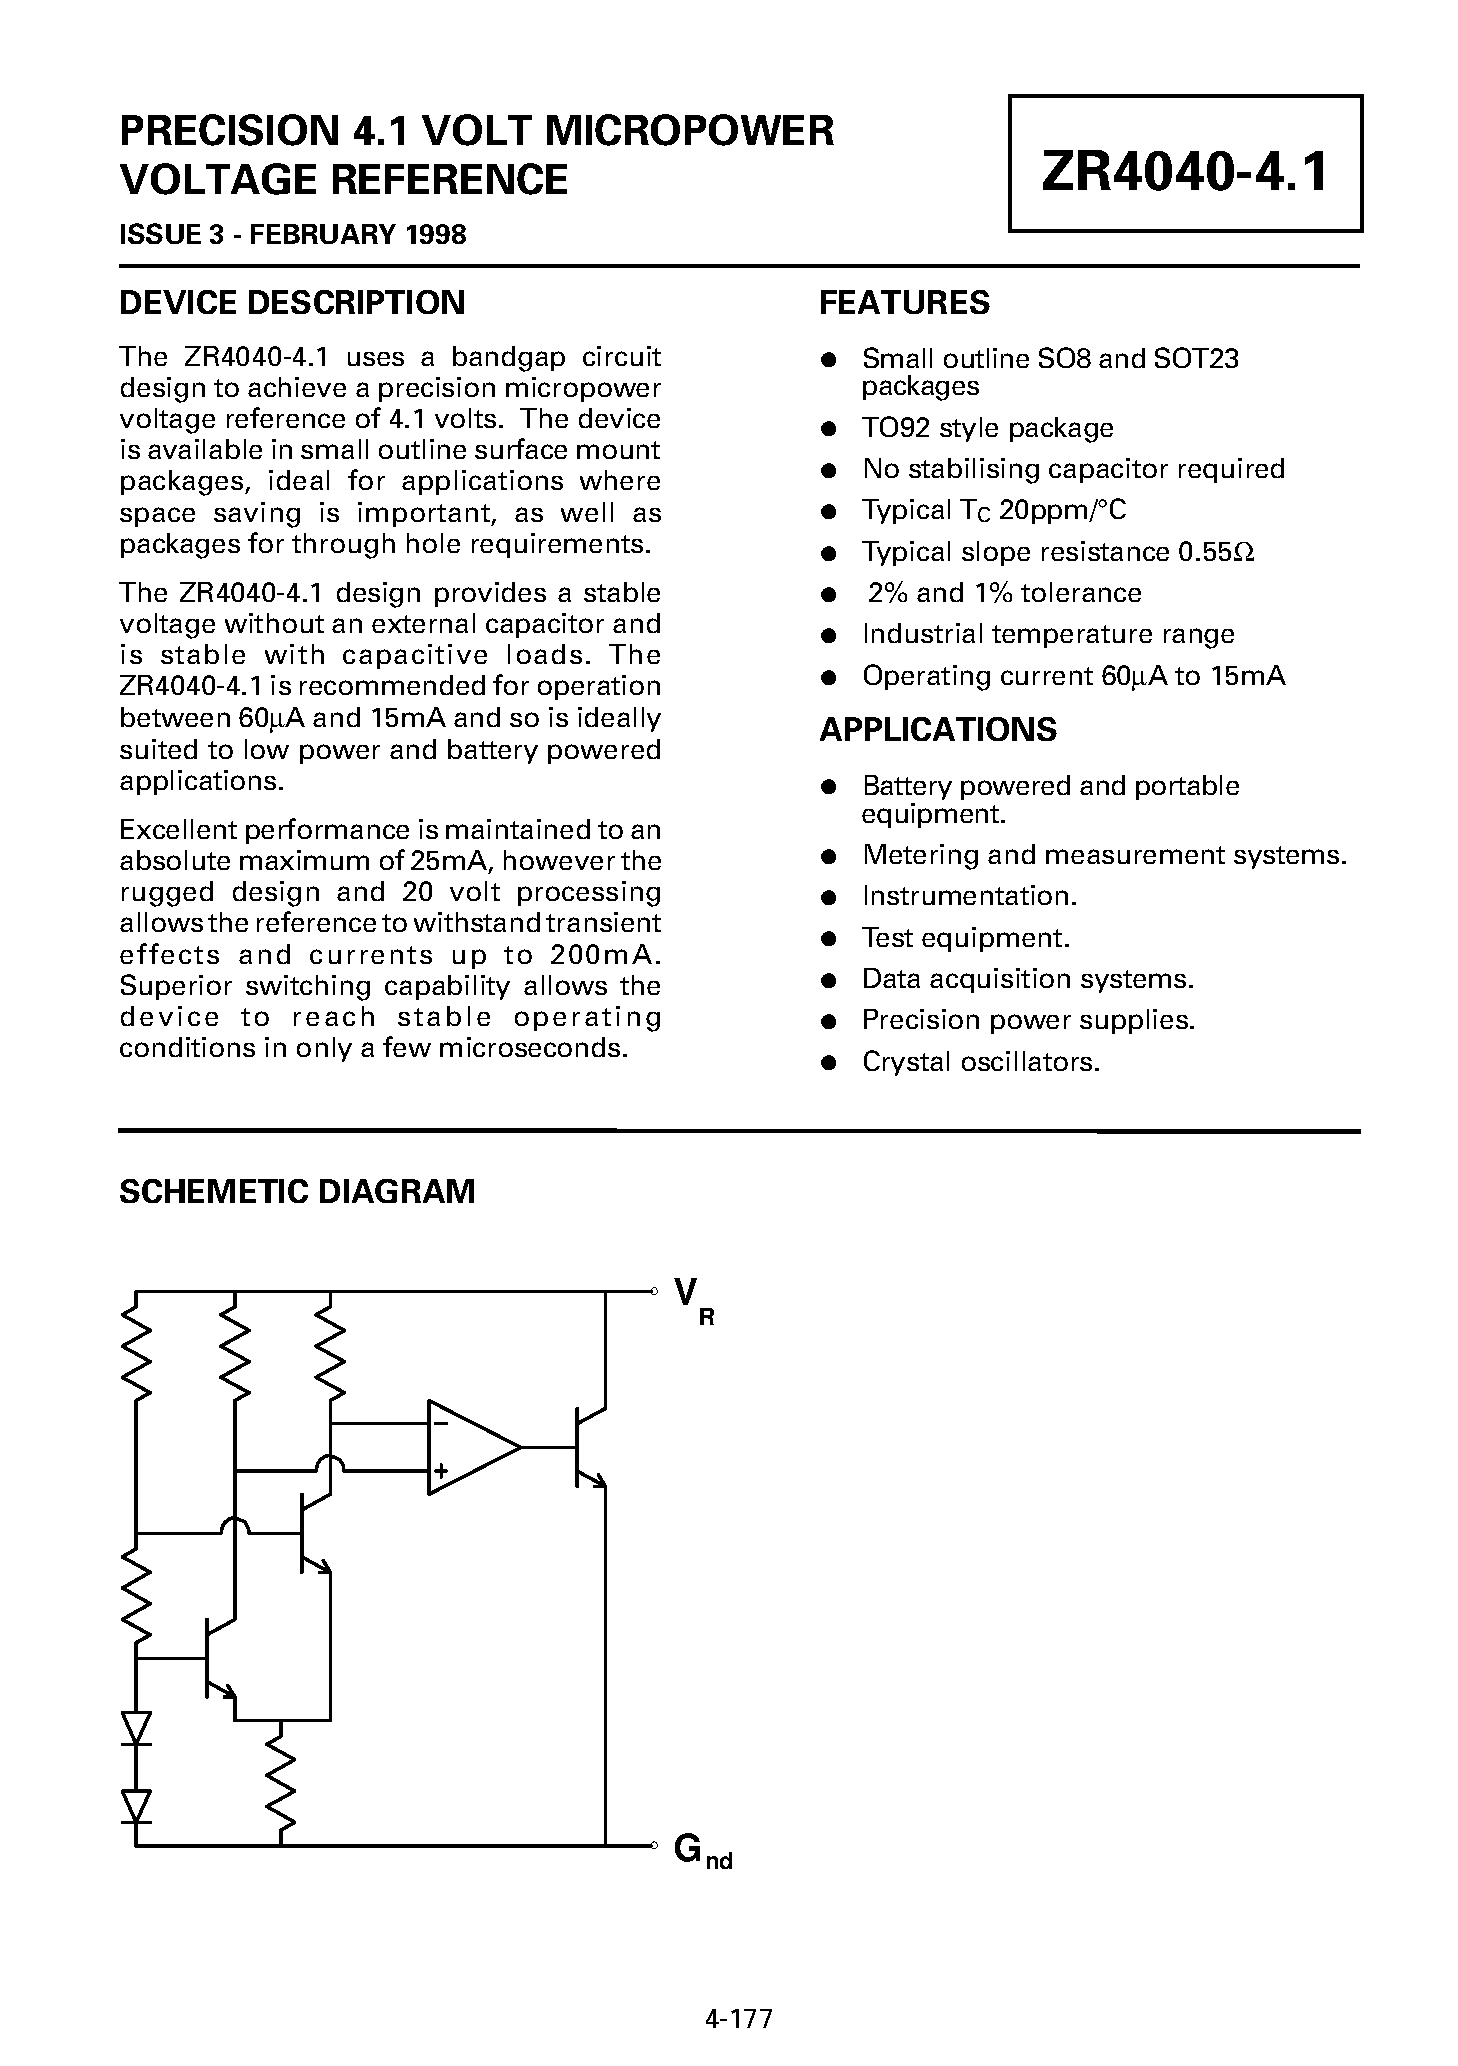 Datasheet ZR40402N841 - PRECISION 4.1 VOLT MICROPOWER VOLTAGE REFERENCE page 1